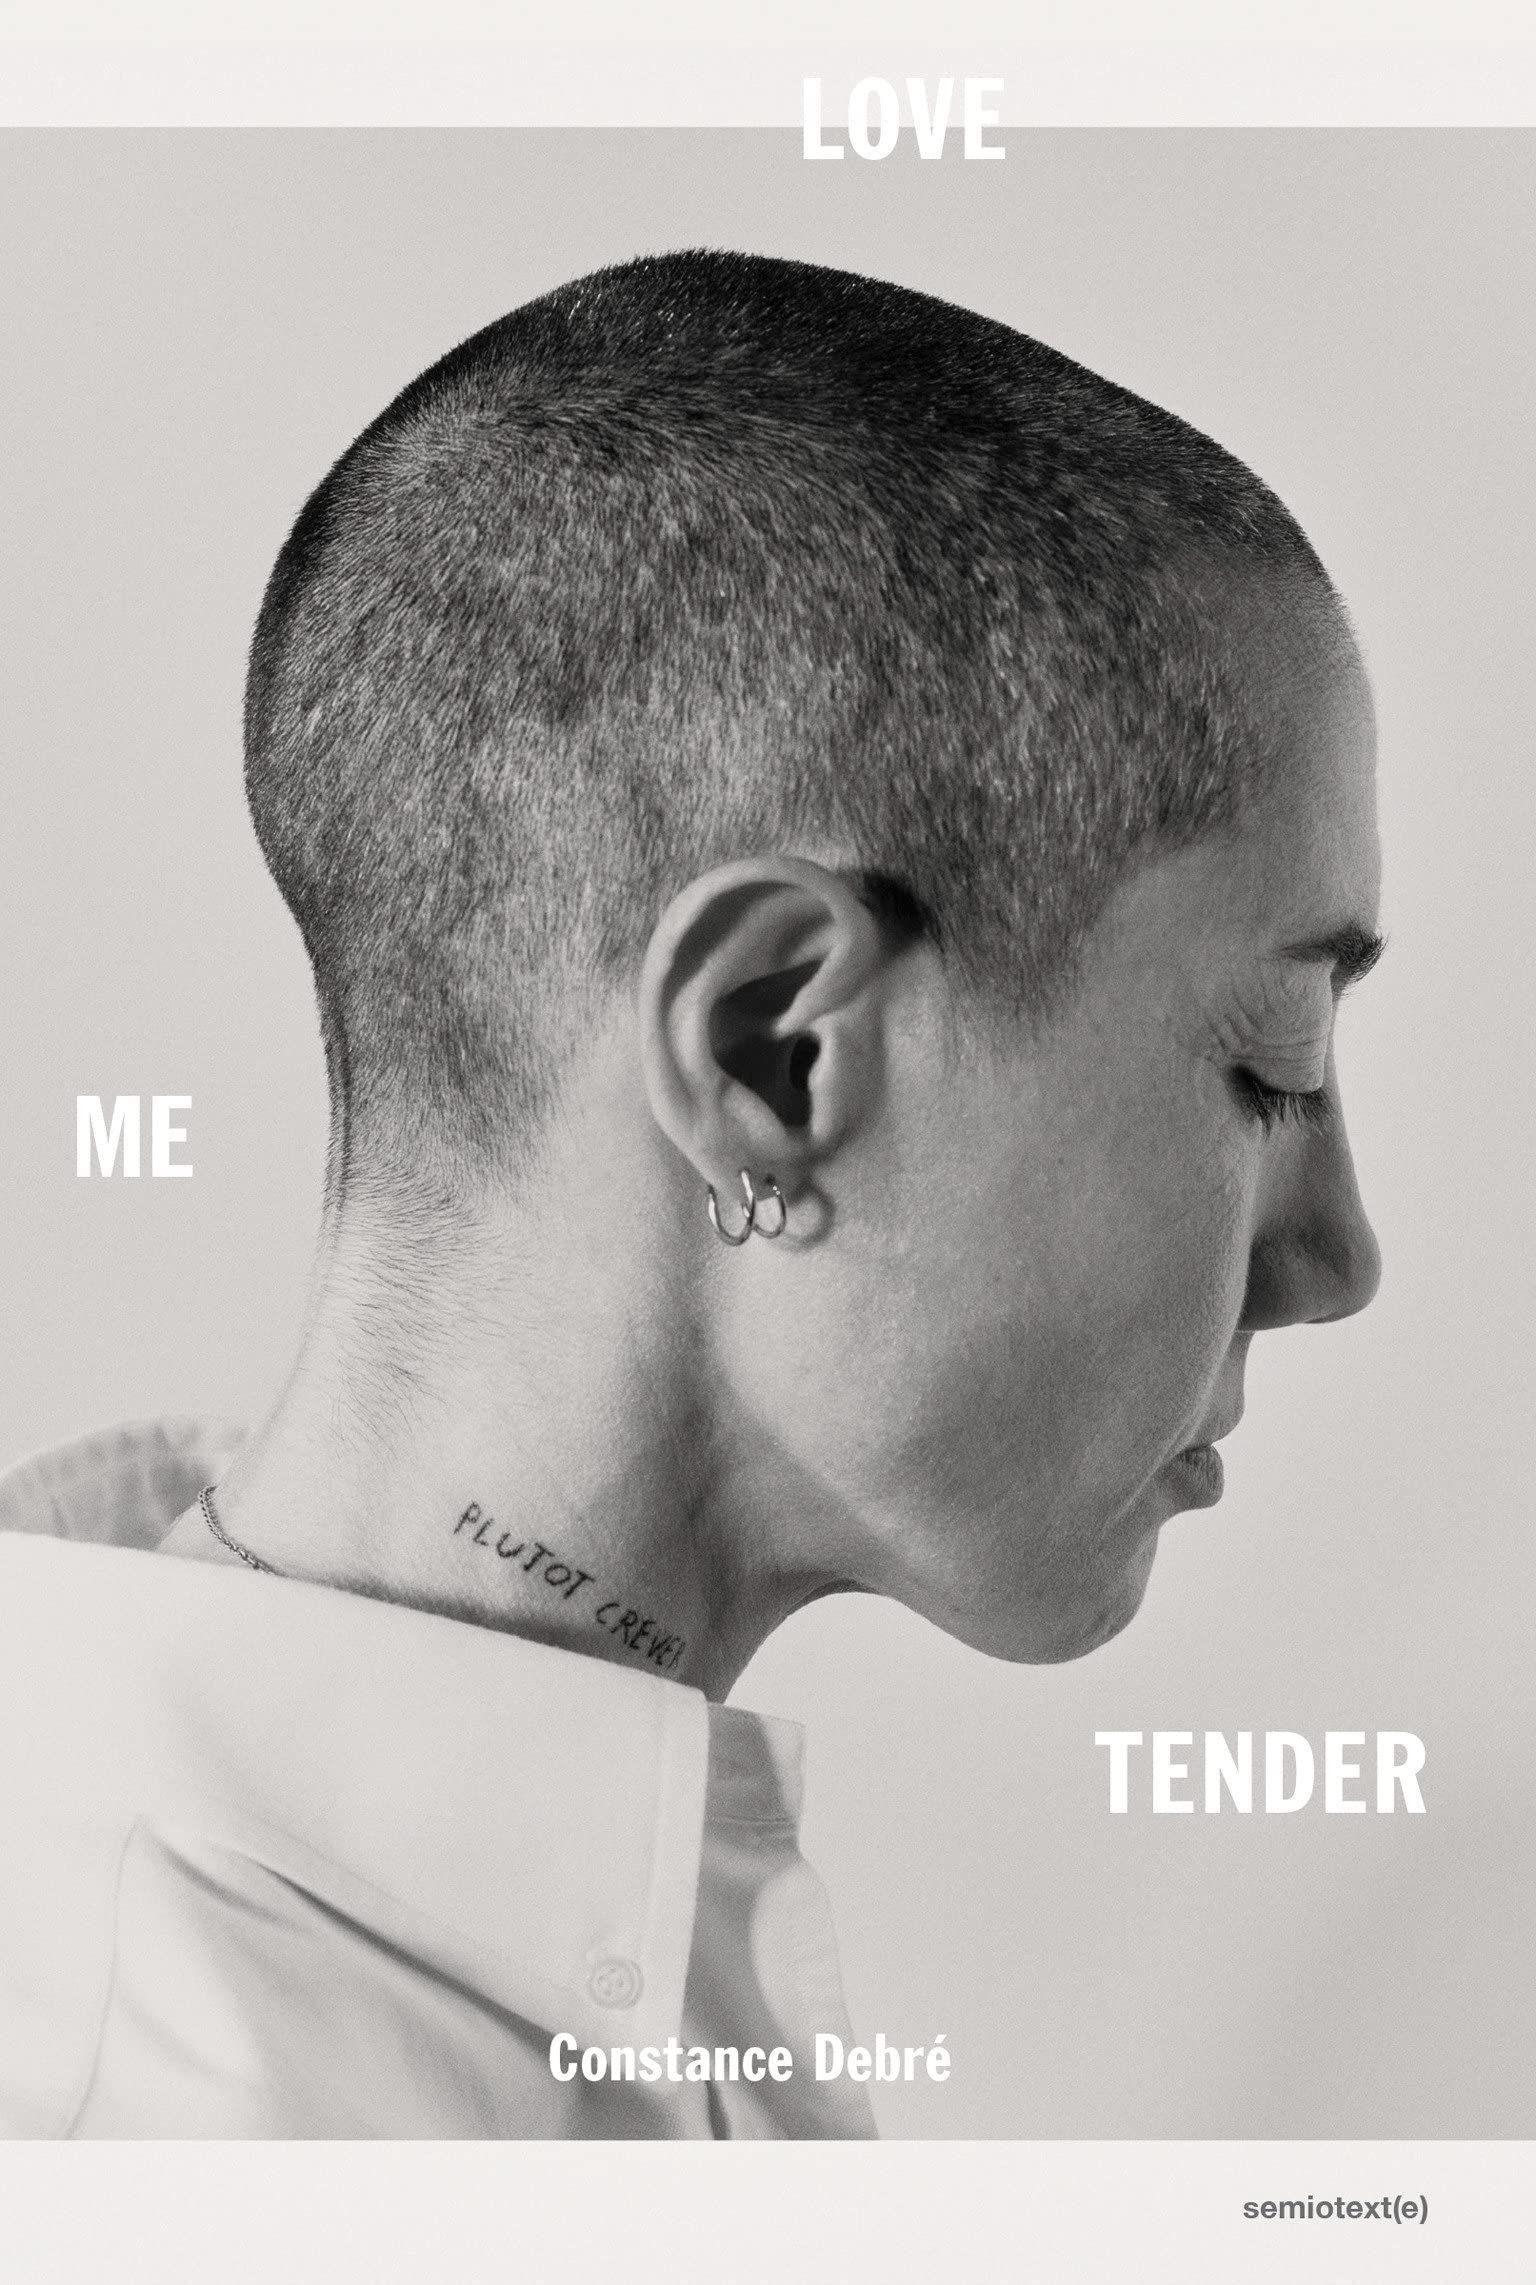 Absolute Sovereignty: On Constance Debré’s “Love Me Tender”